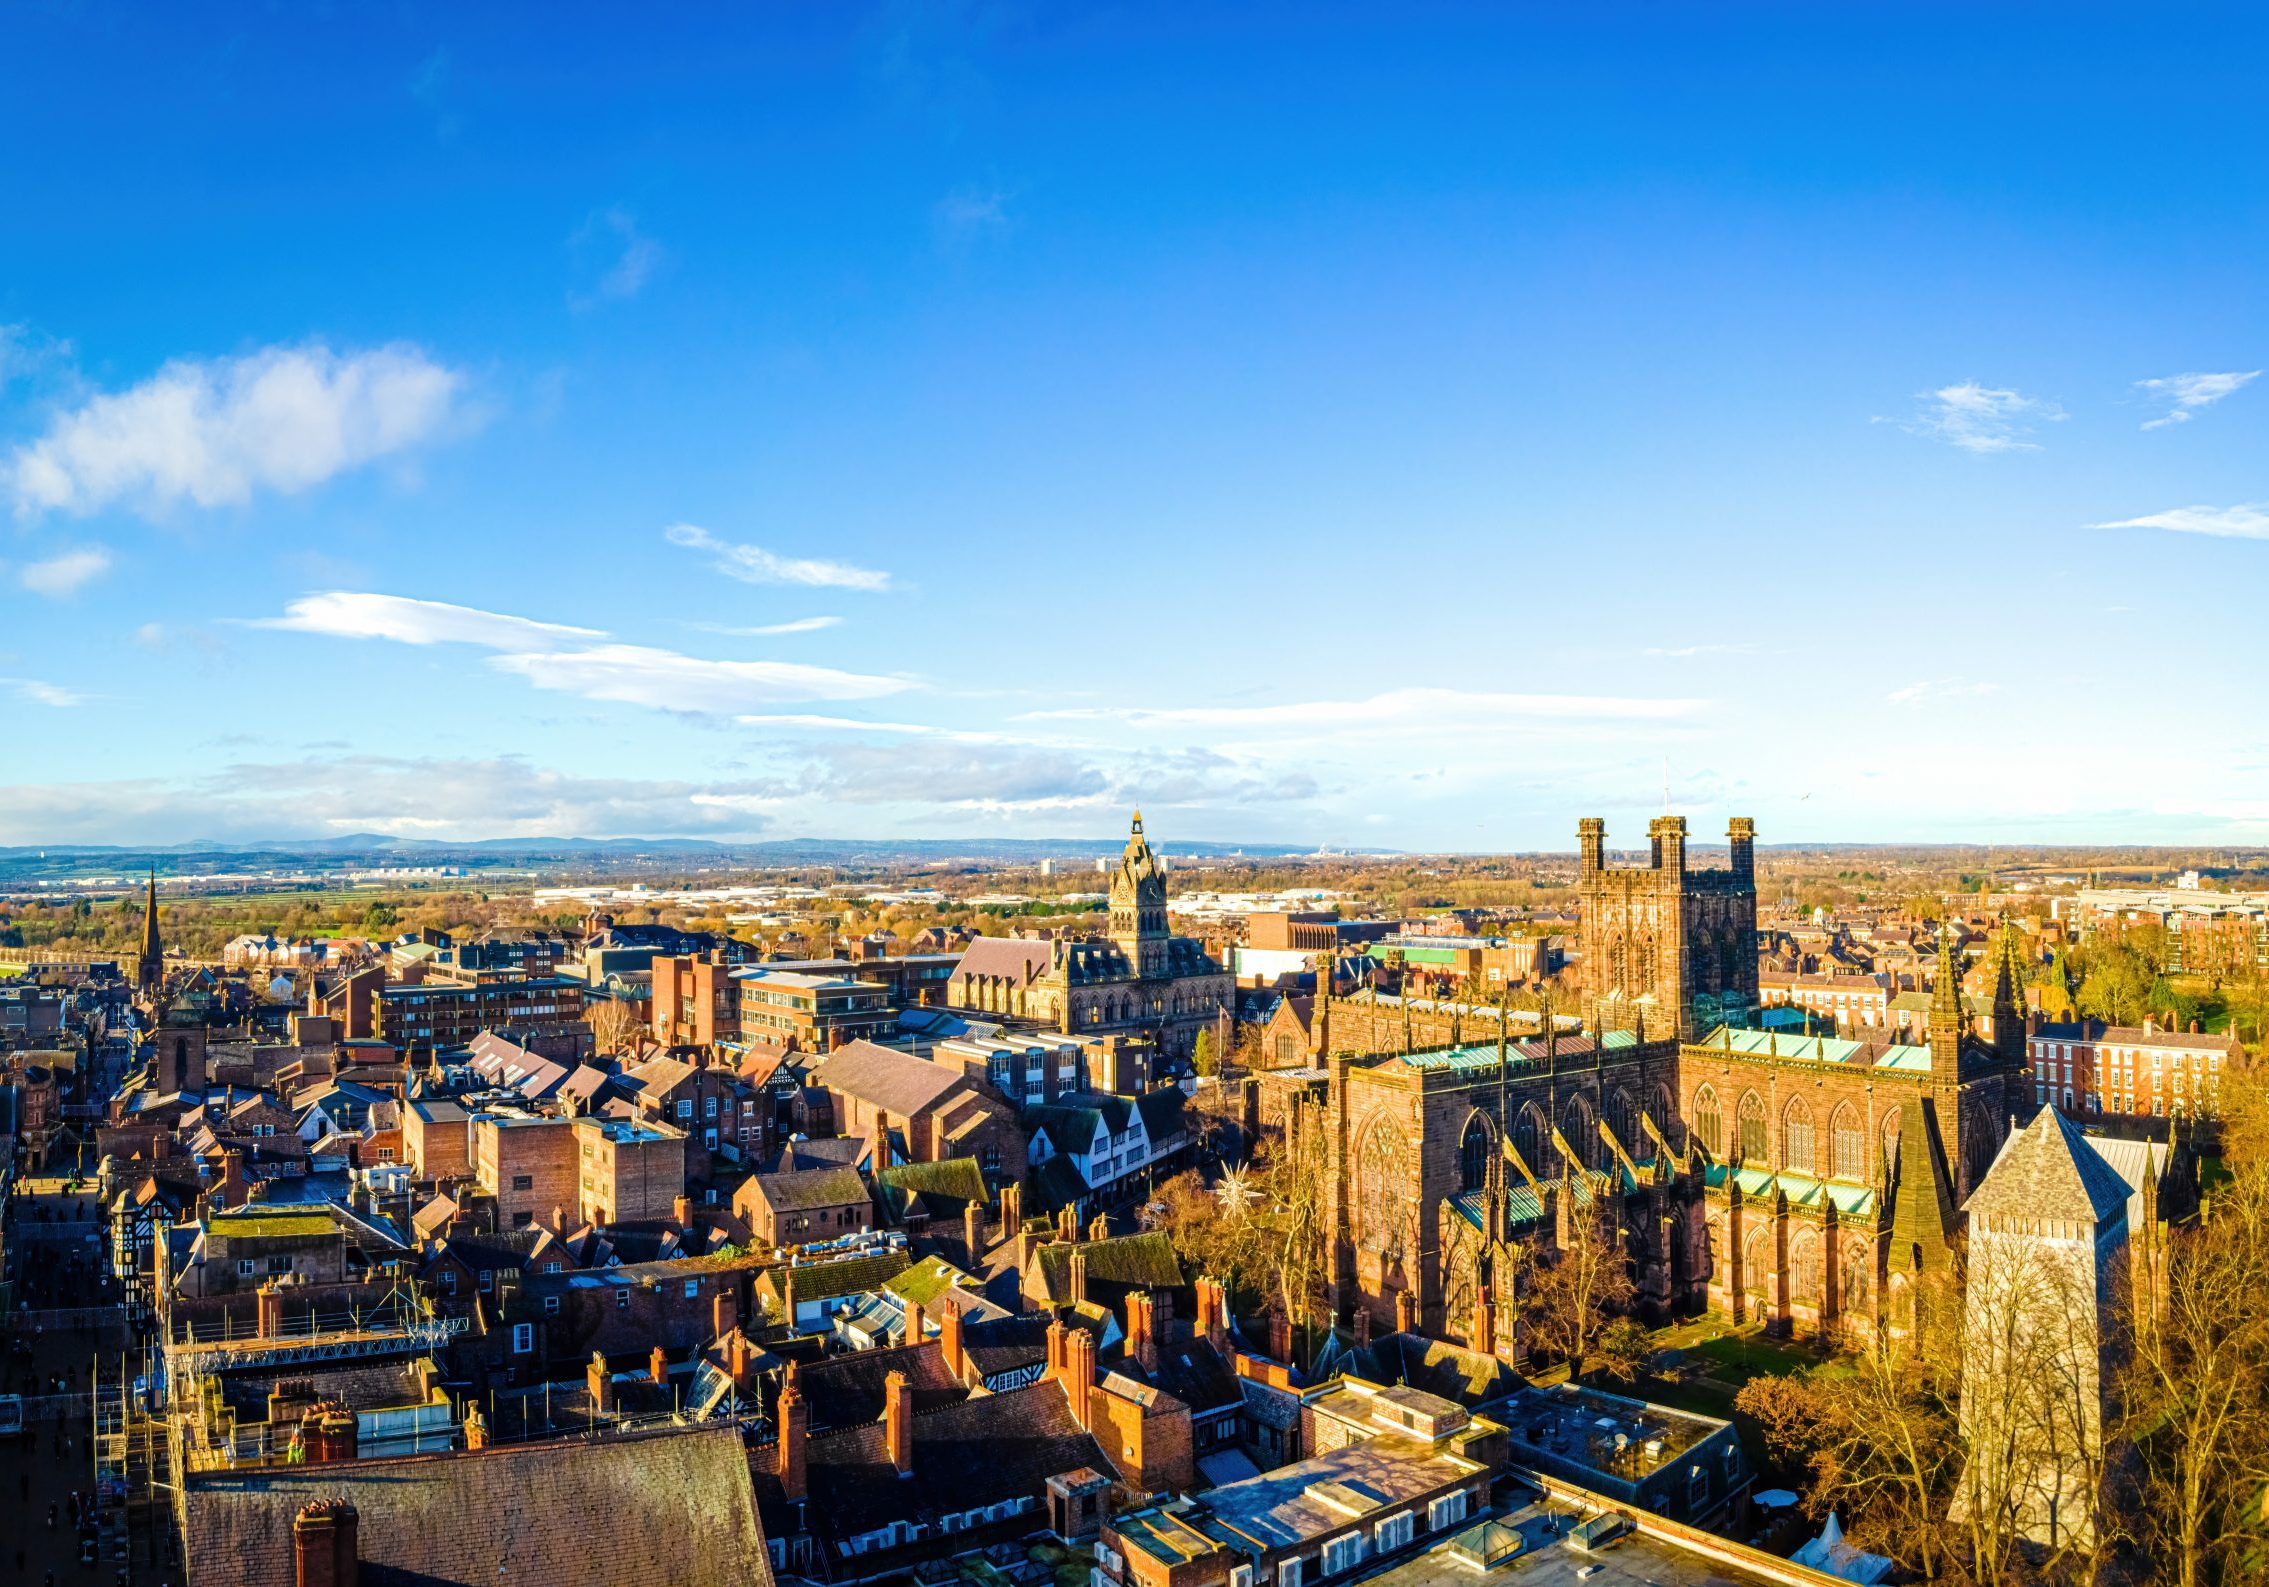 Aerial view of Chester, a city in northwest England,  known for its extensive Roman walls made of local red sandstone, UK